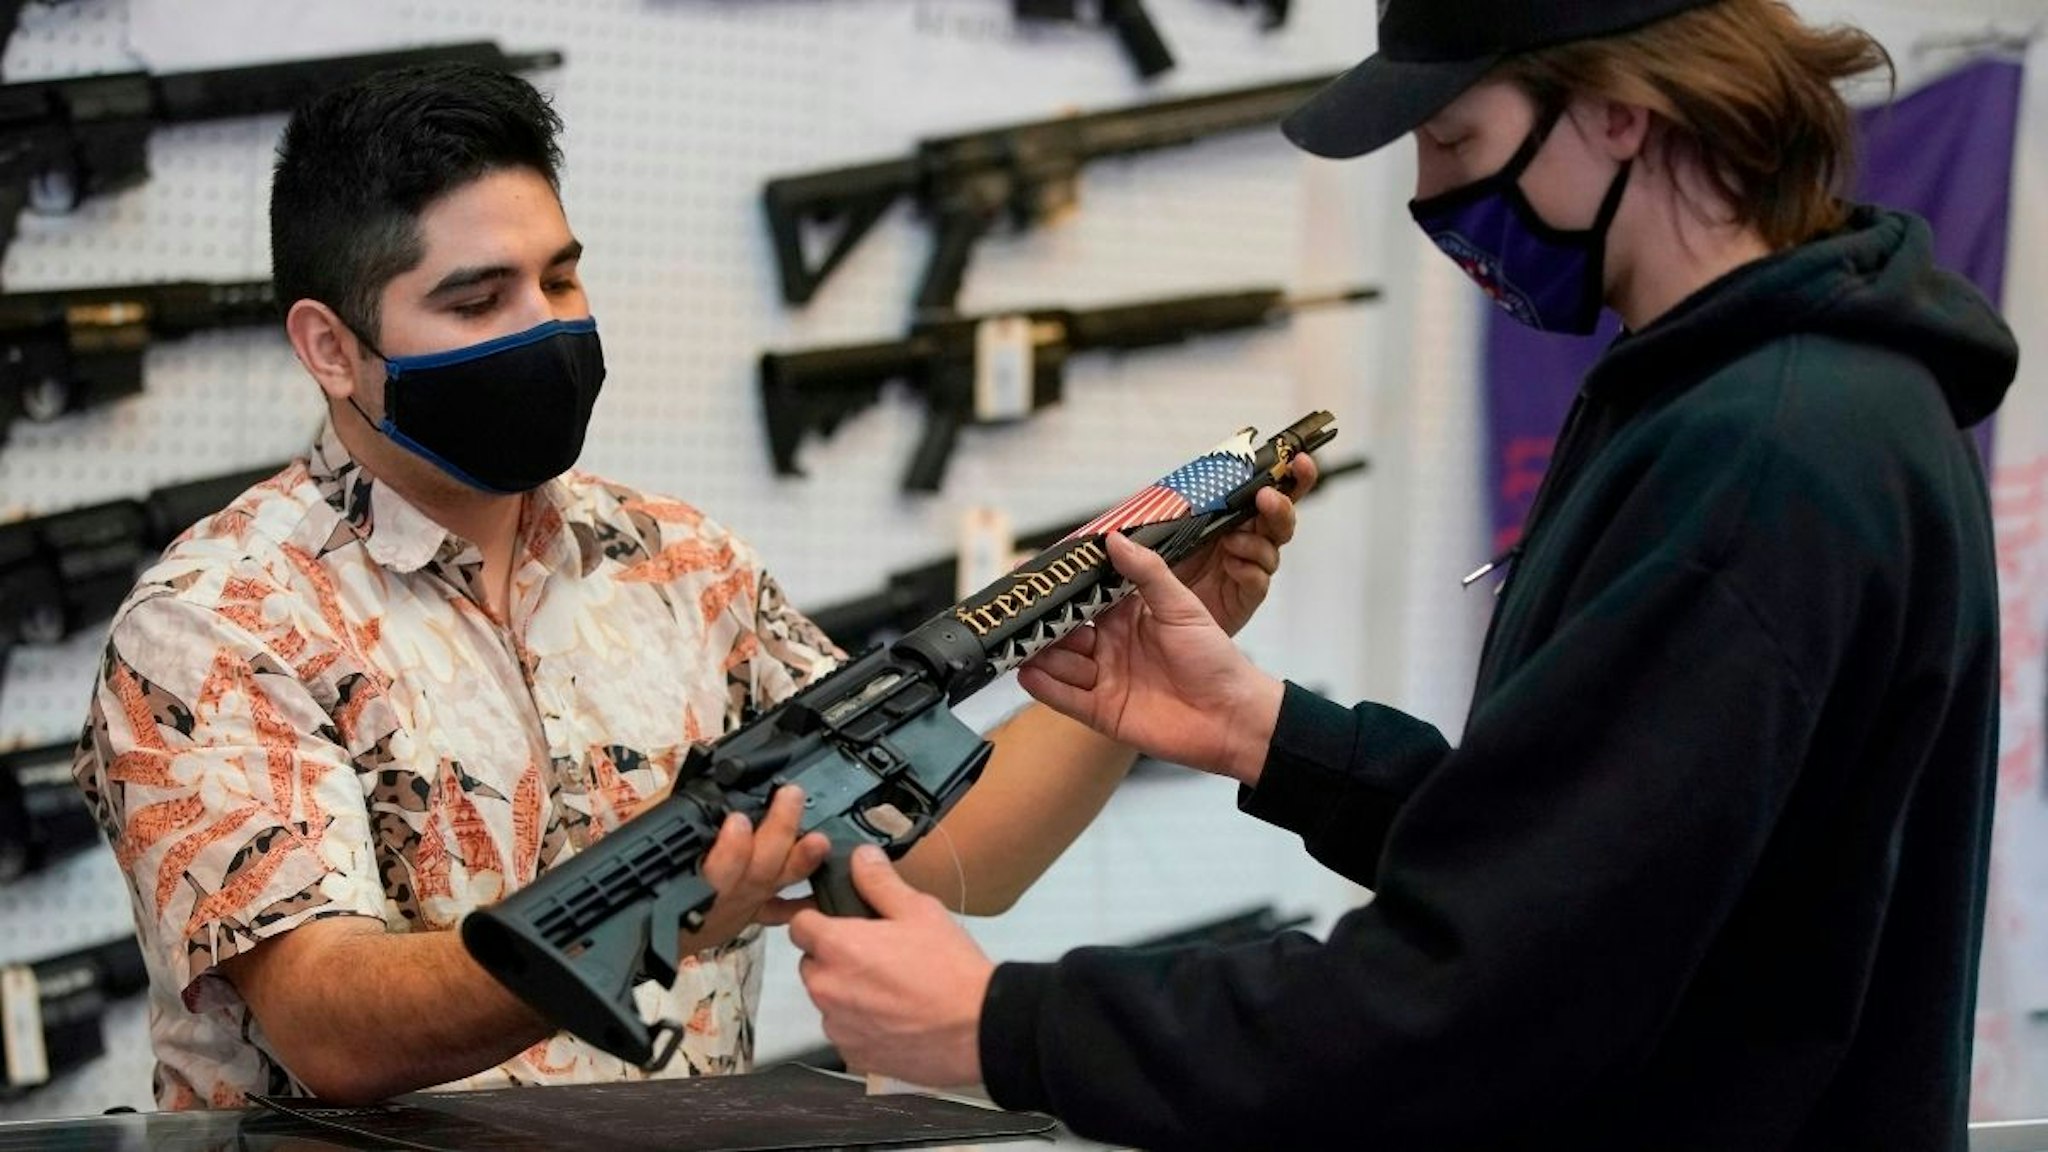 A customer looks at a custom made AR-15 style rifle at Davidson Defense in Orem, Utah on February 4, 2021.